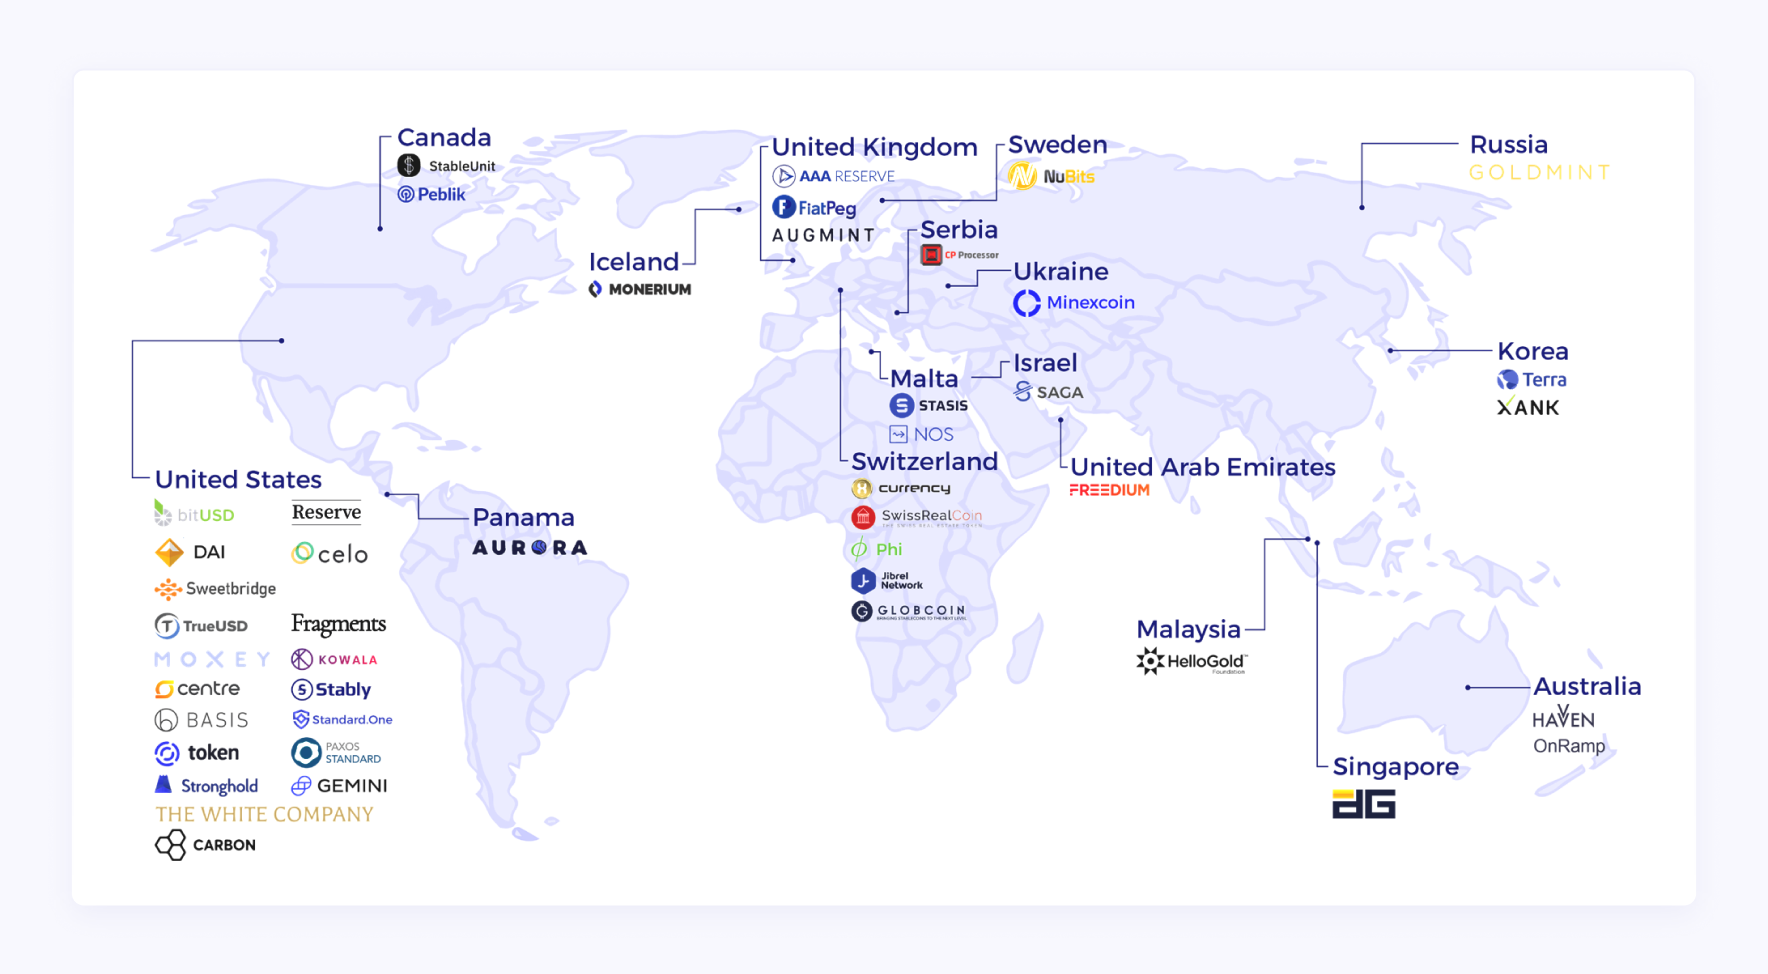 The world of stablecoins map